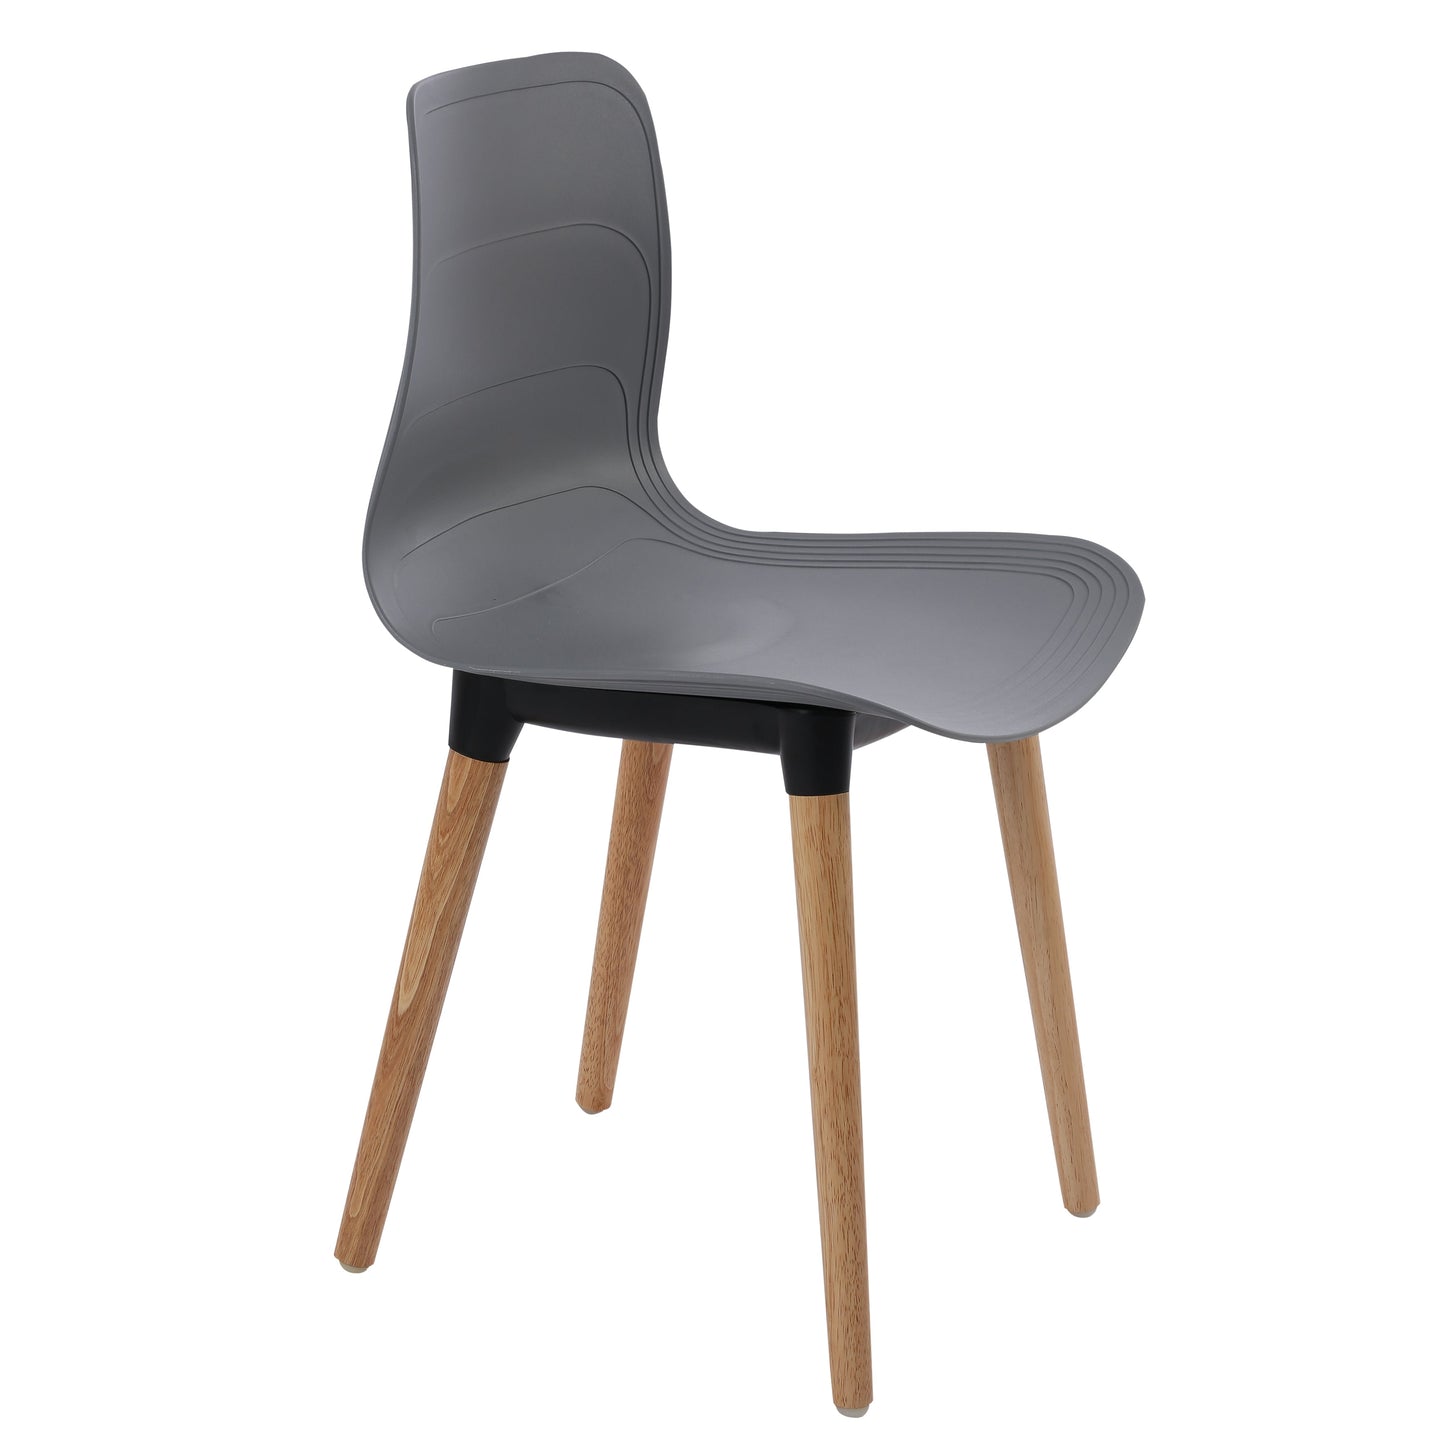 Plastic Chairs With Wood Legs For Cafe and Dining HIFUWA-G (Grey)